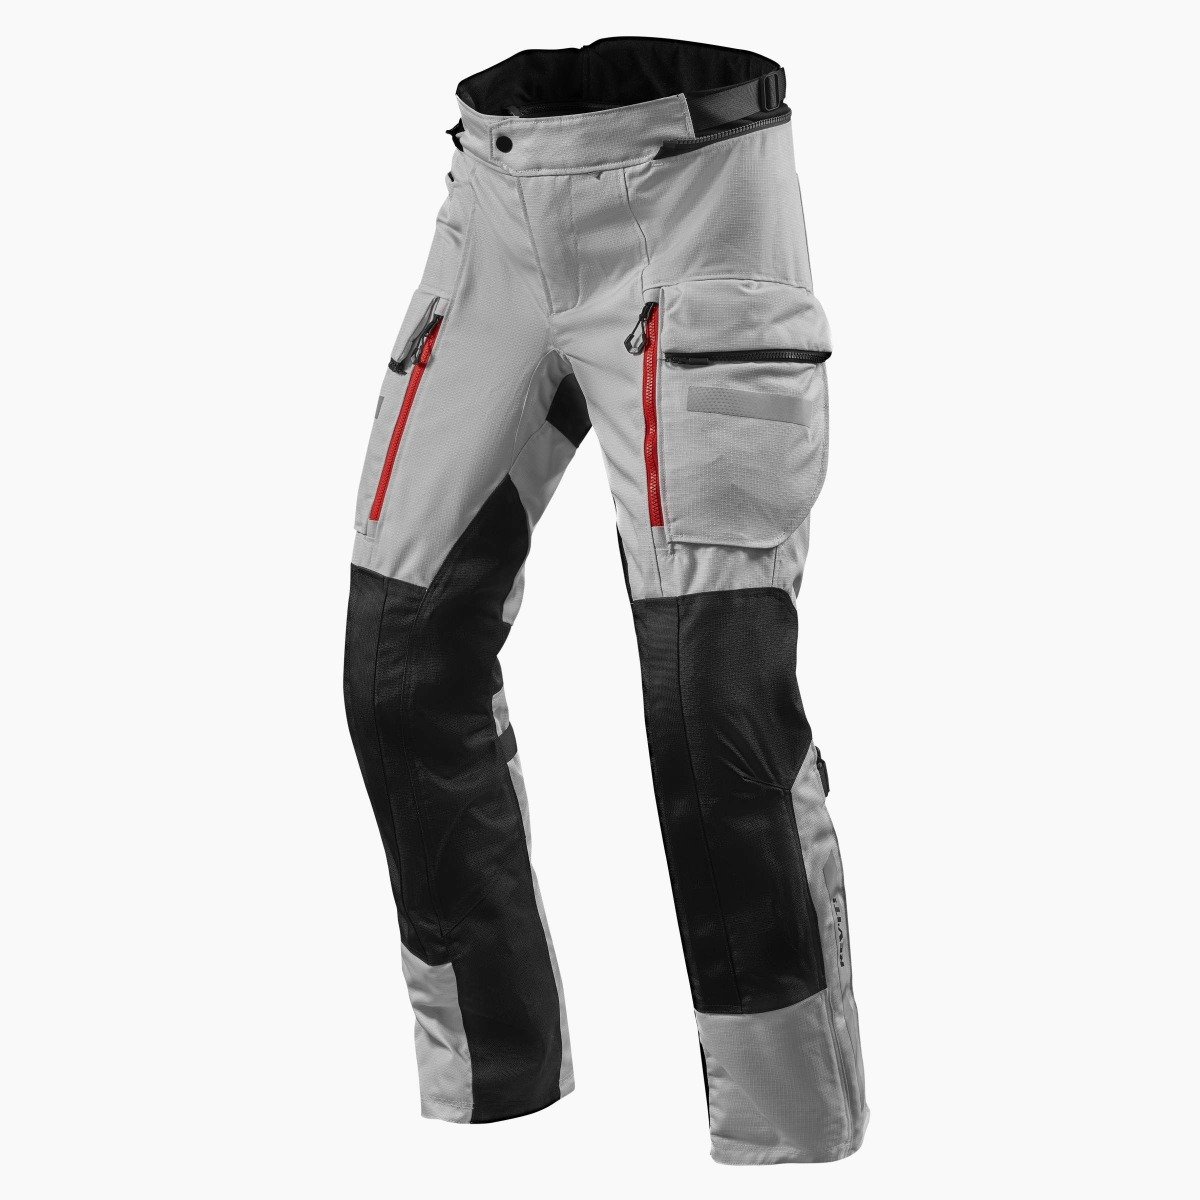 Image of REV'IT! Sand 4 H2O Short Silver Black Motorcycle Pants Size S ID 8700001316484